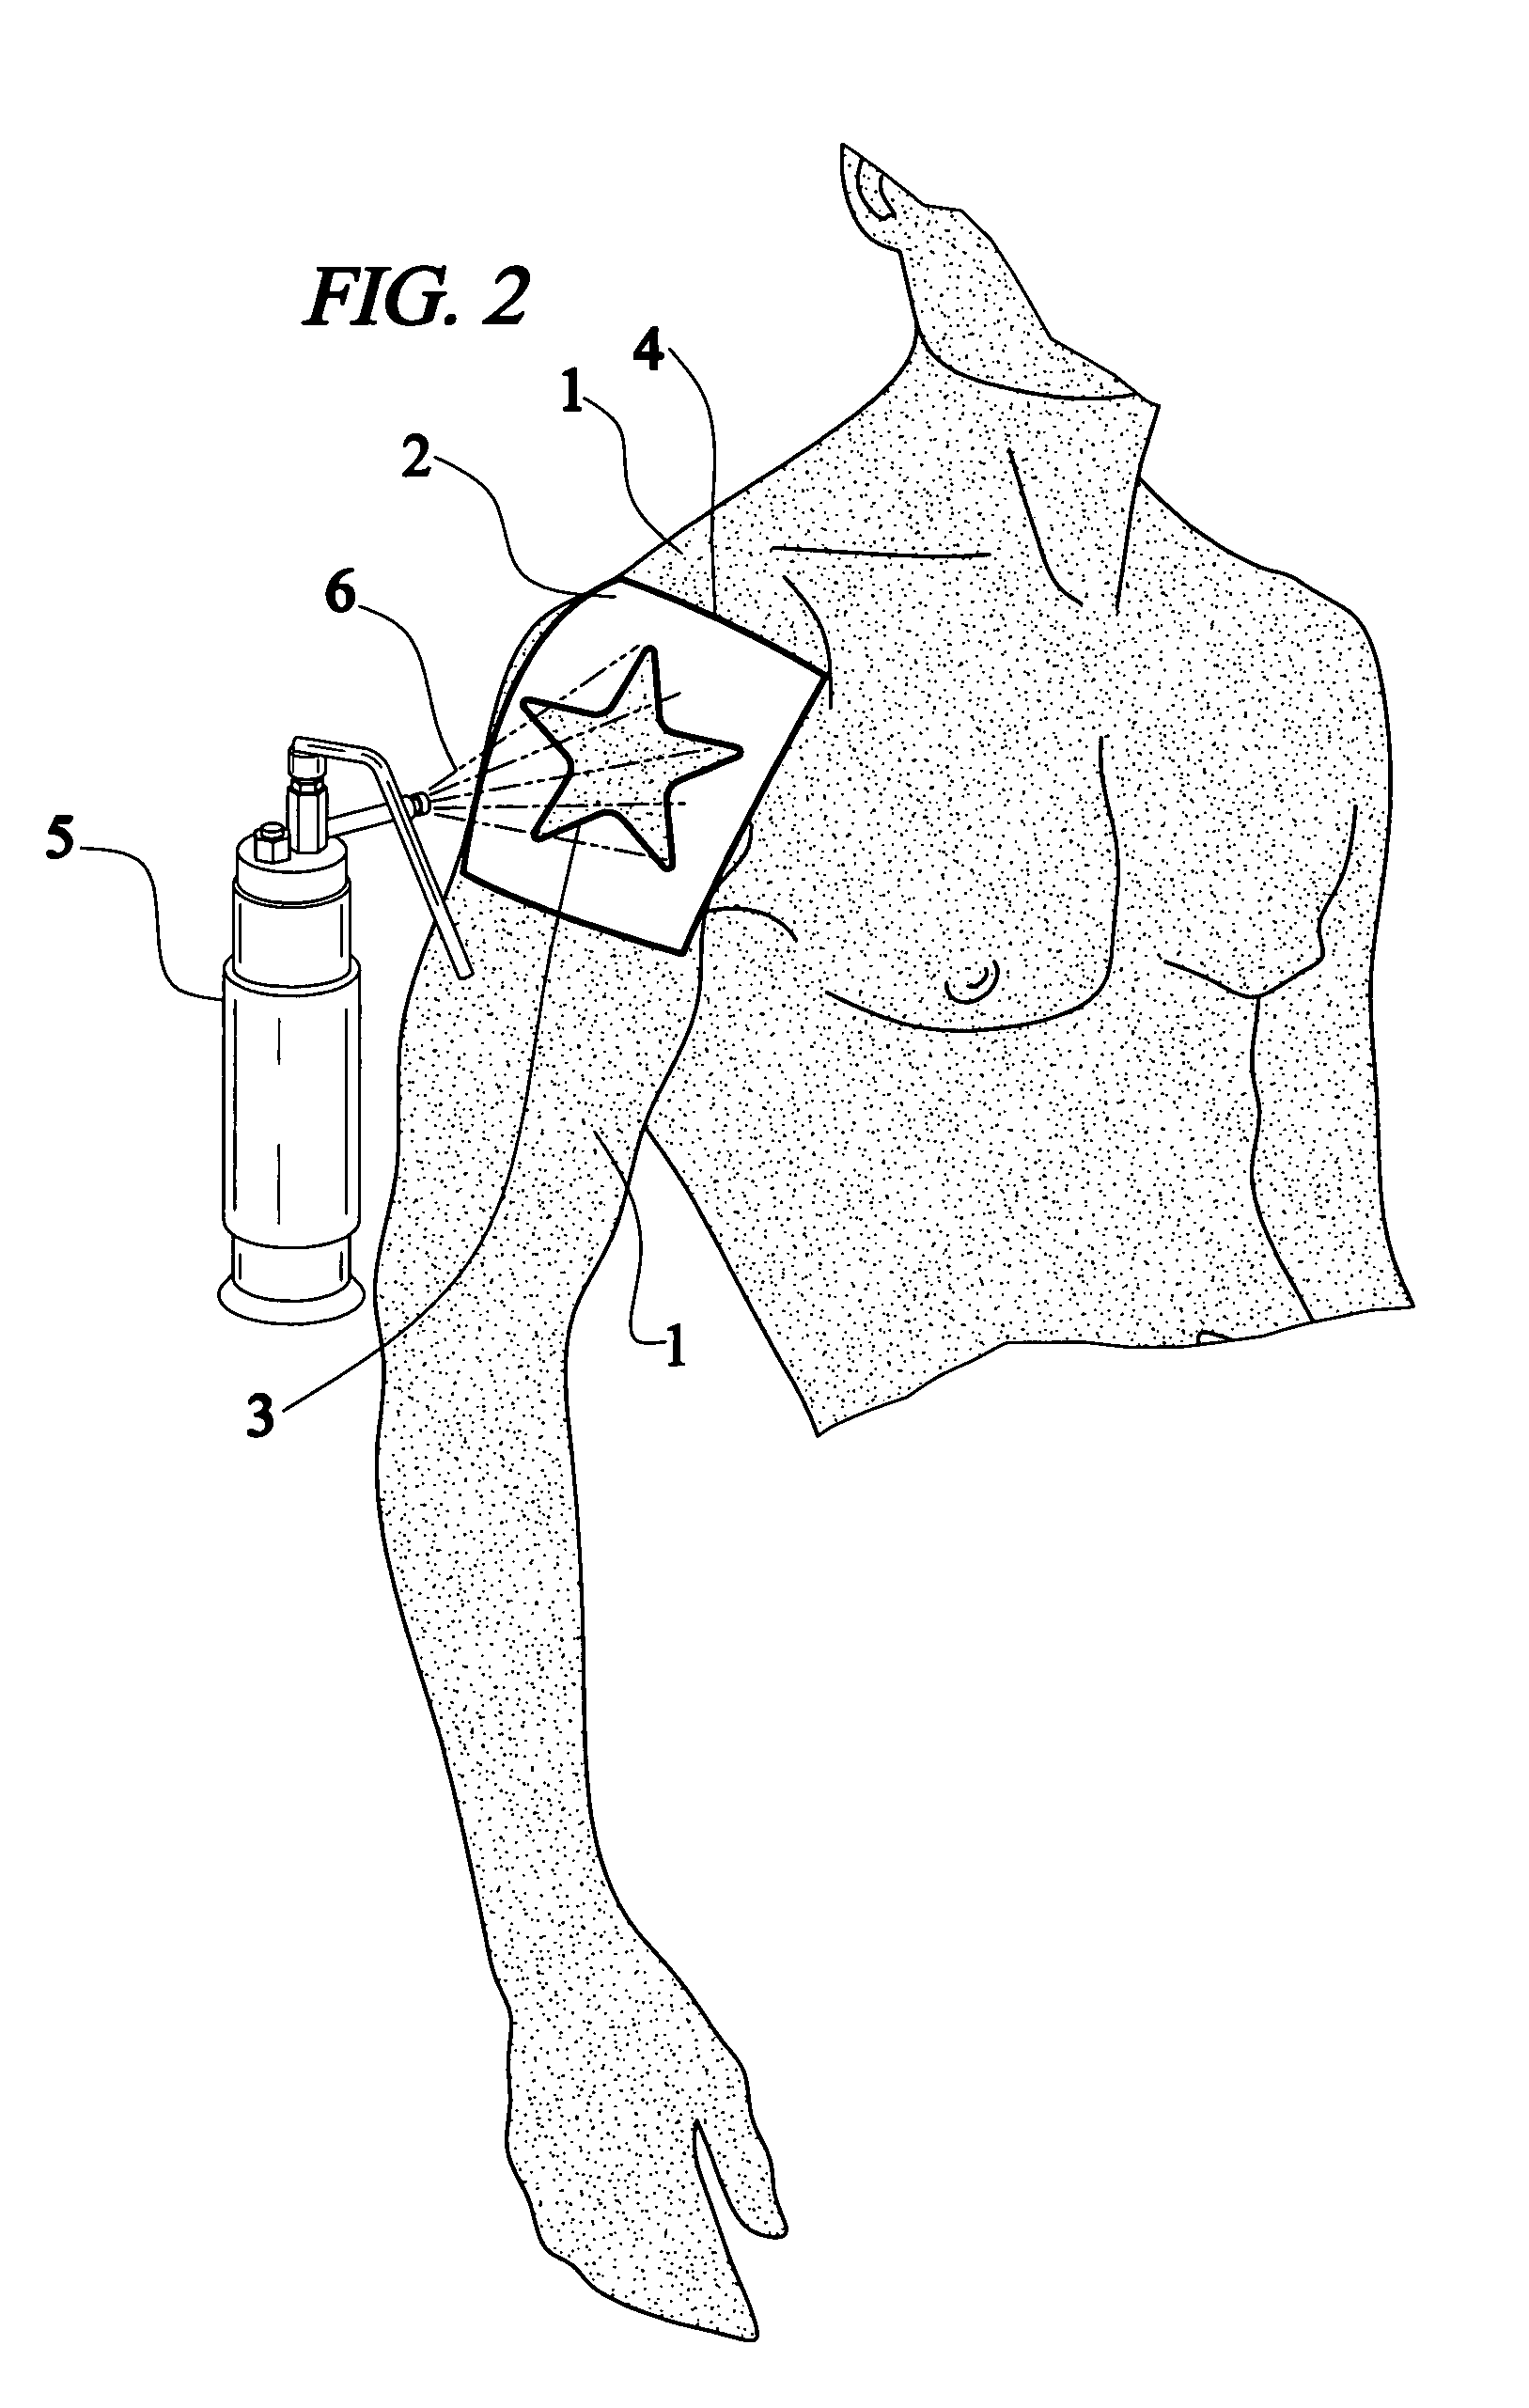 Method for producing a permanent or nearly permanent skin image, design or tattoo by freezing the skin